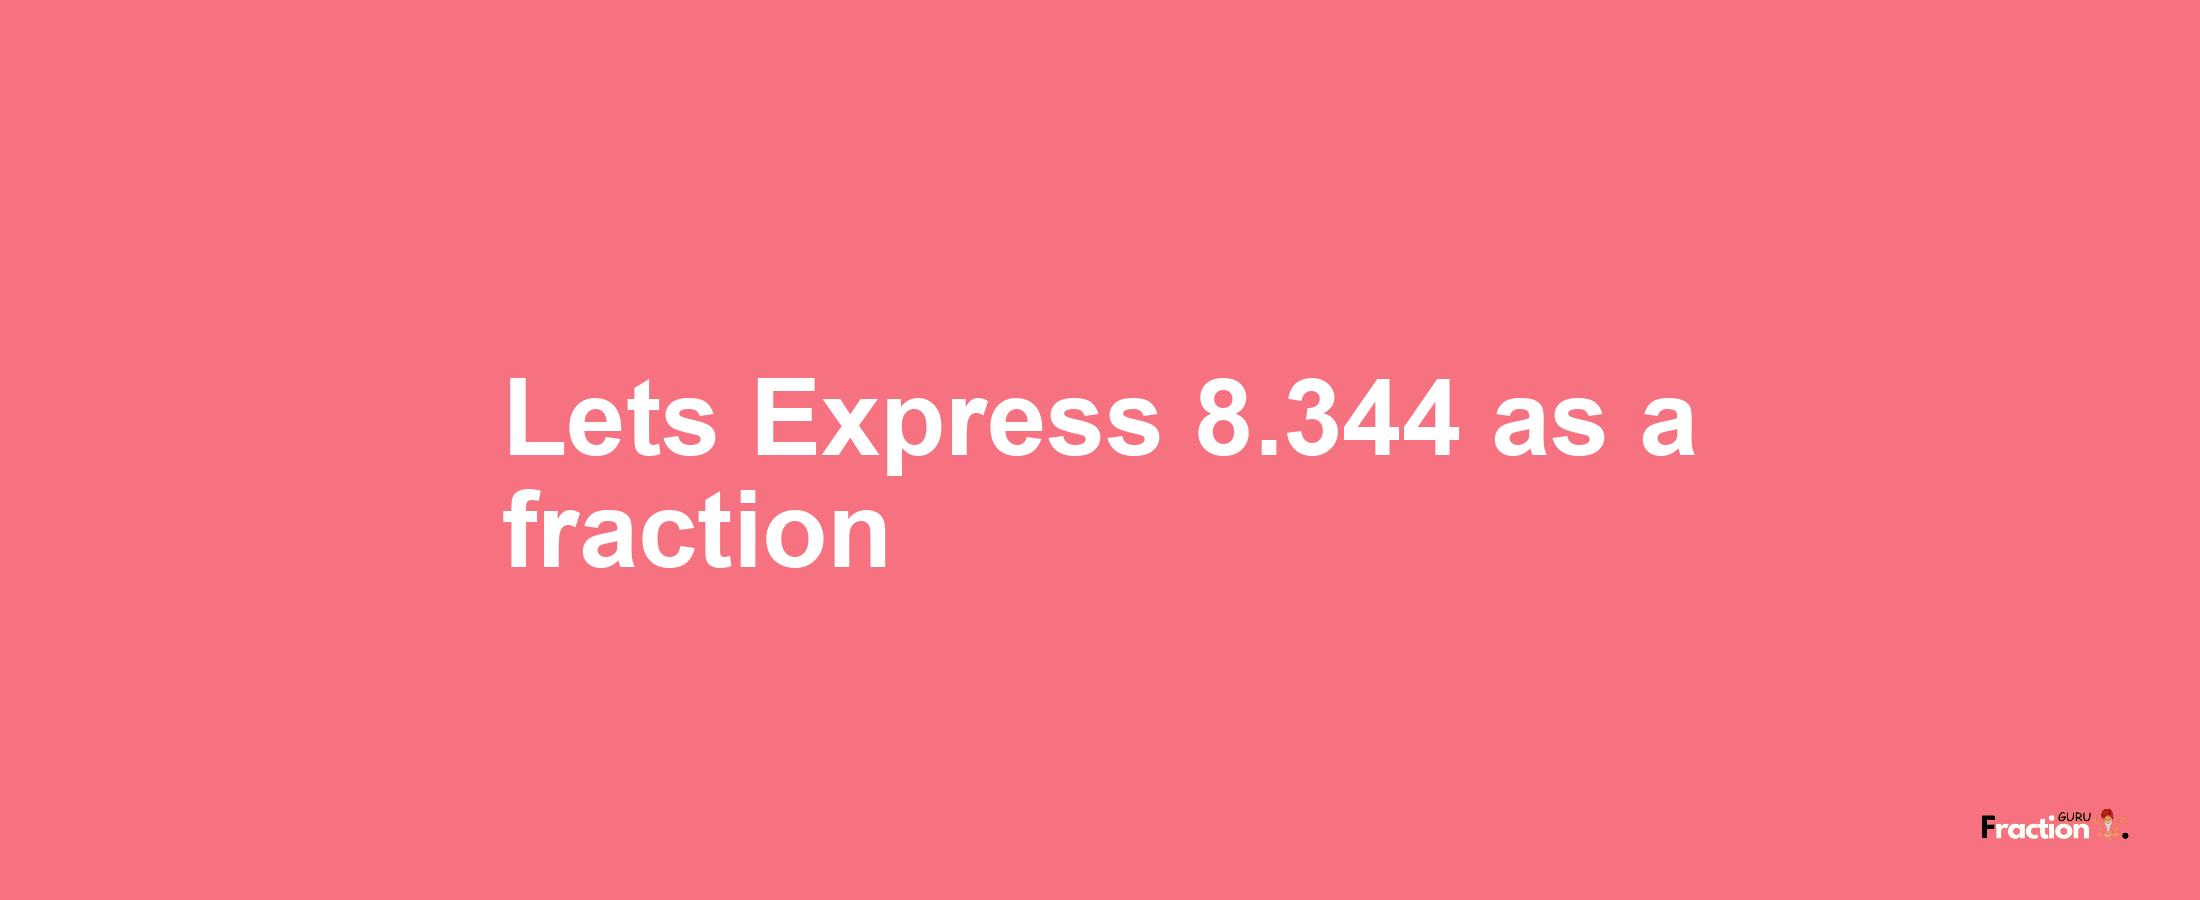 Lets Express 8.344 as afraction